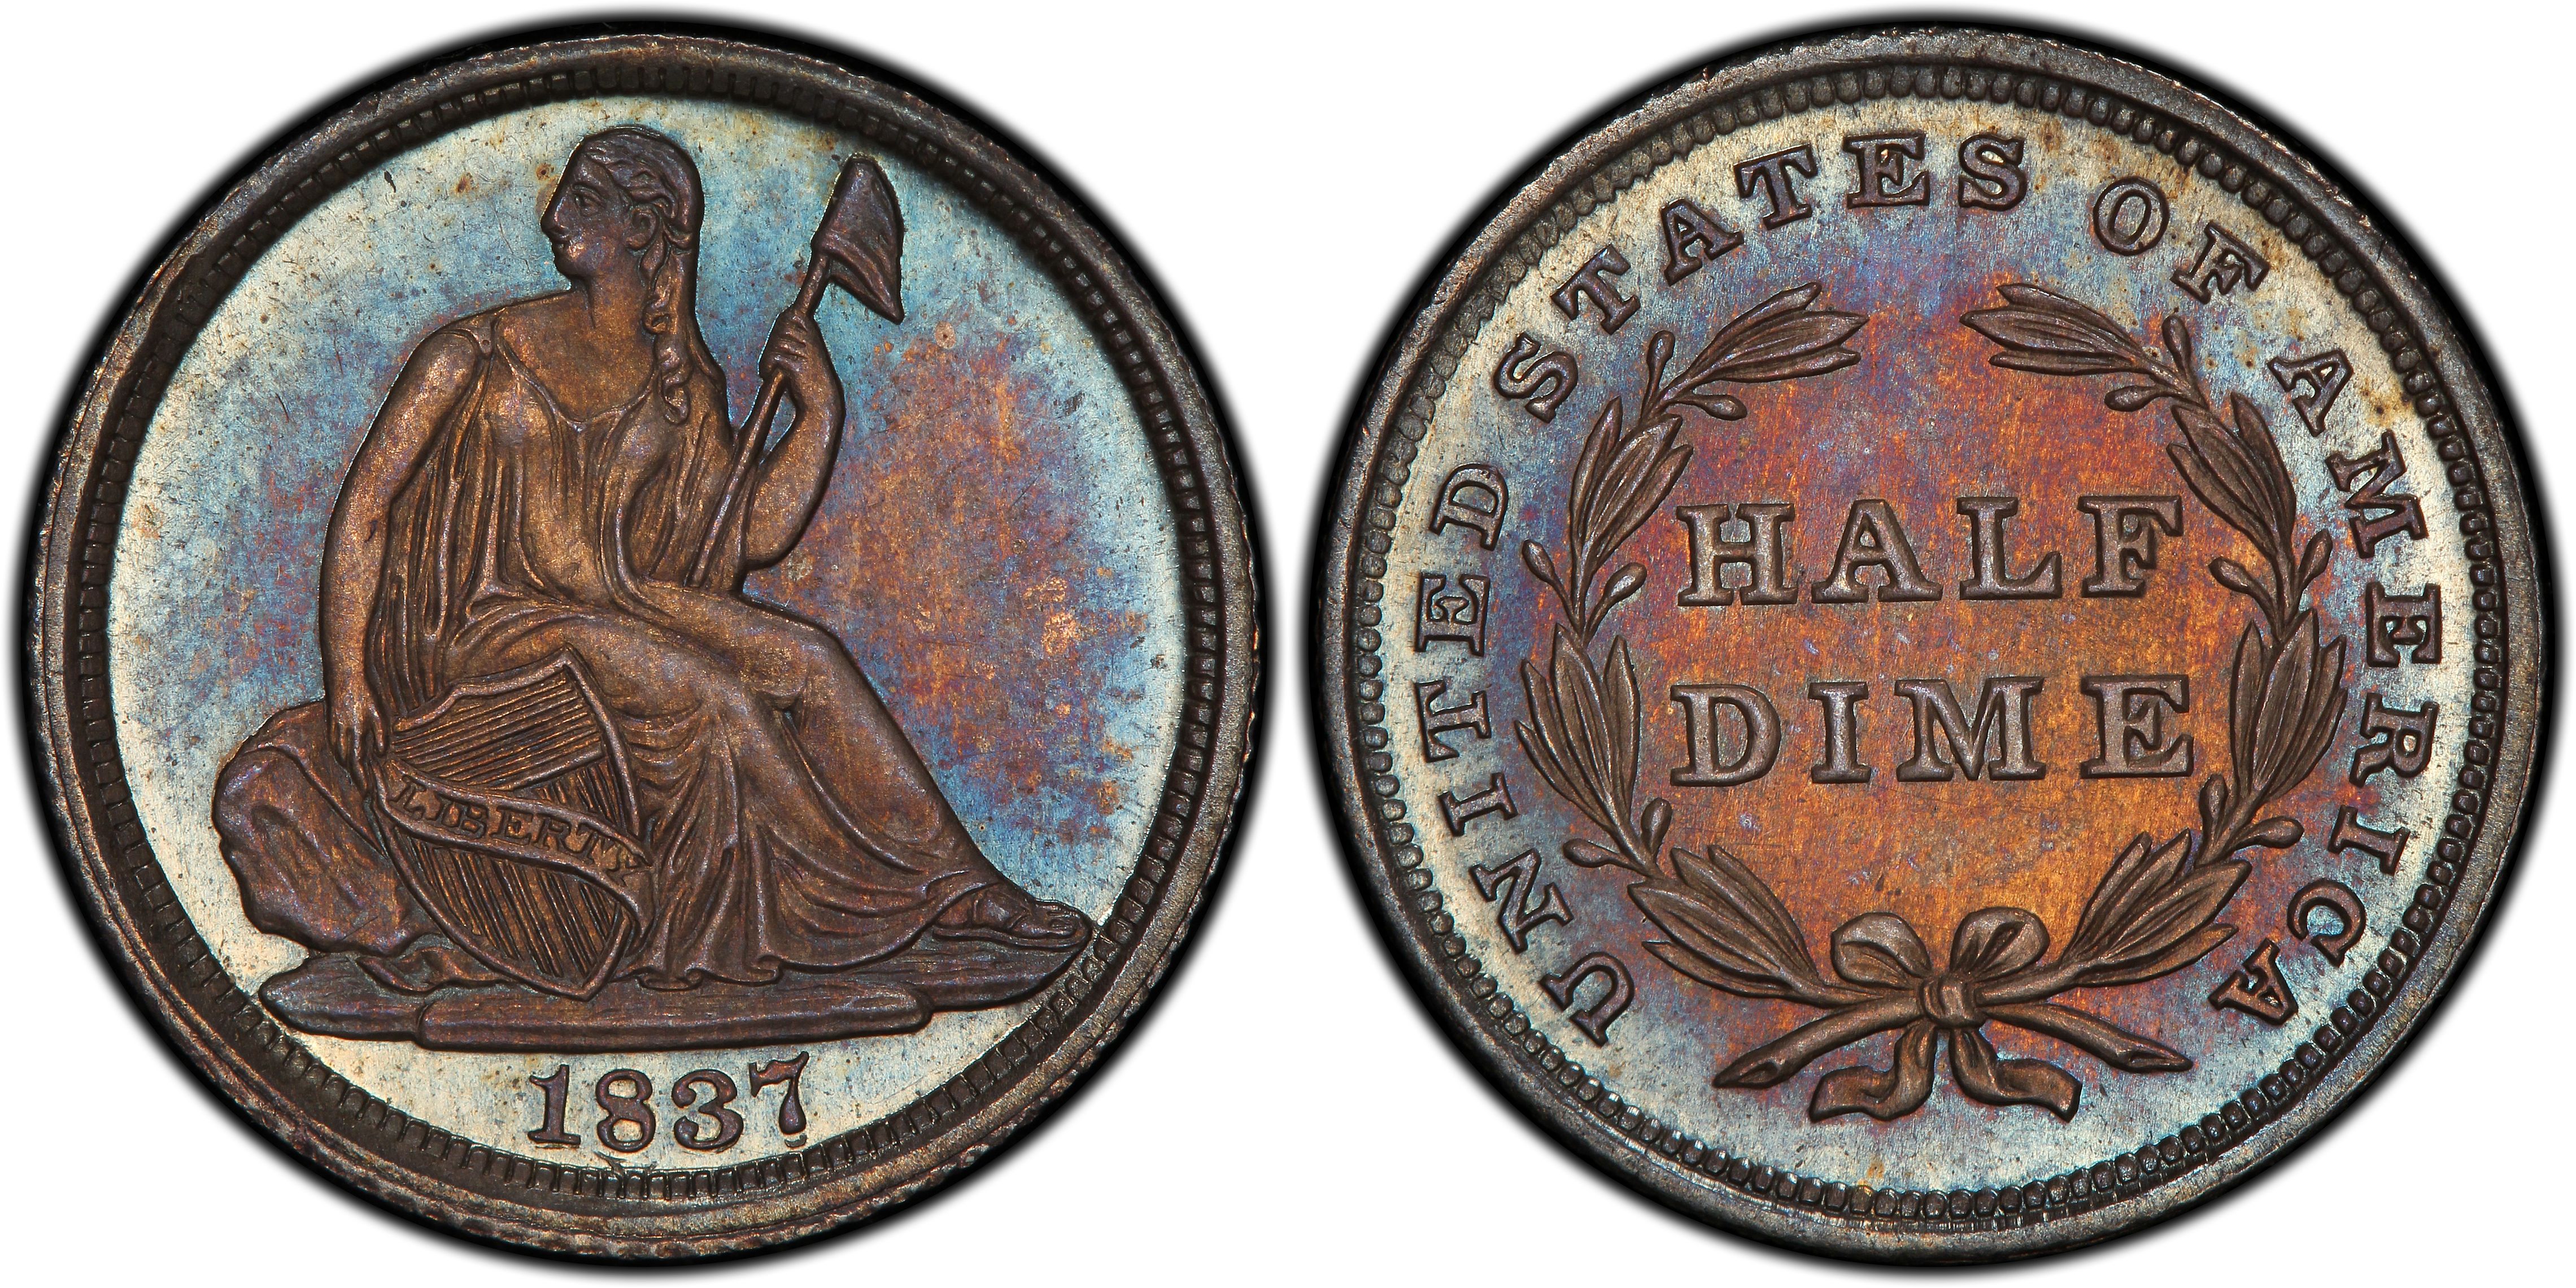 1837 H10C Seated (Proof) Liberty Seated Half Dime - PCGS CoinFacts